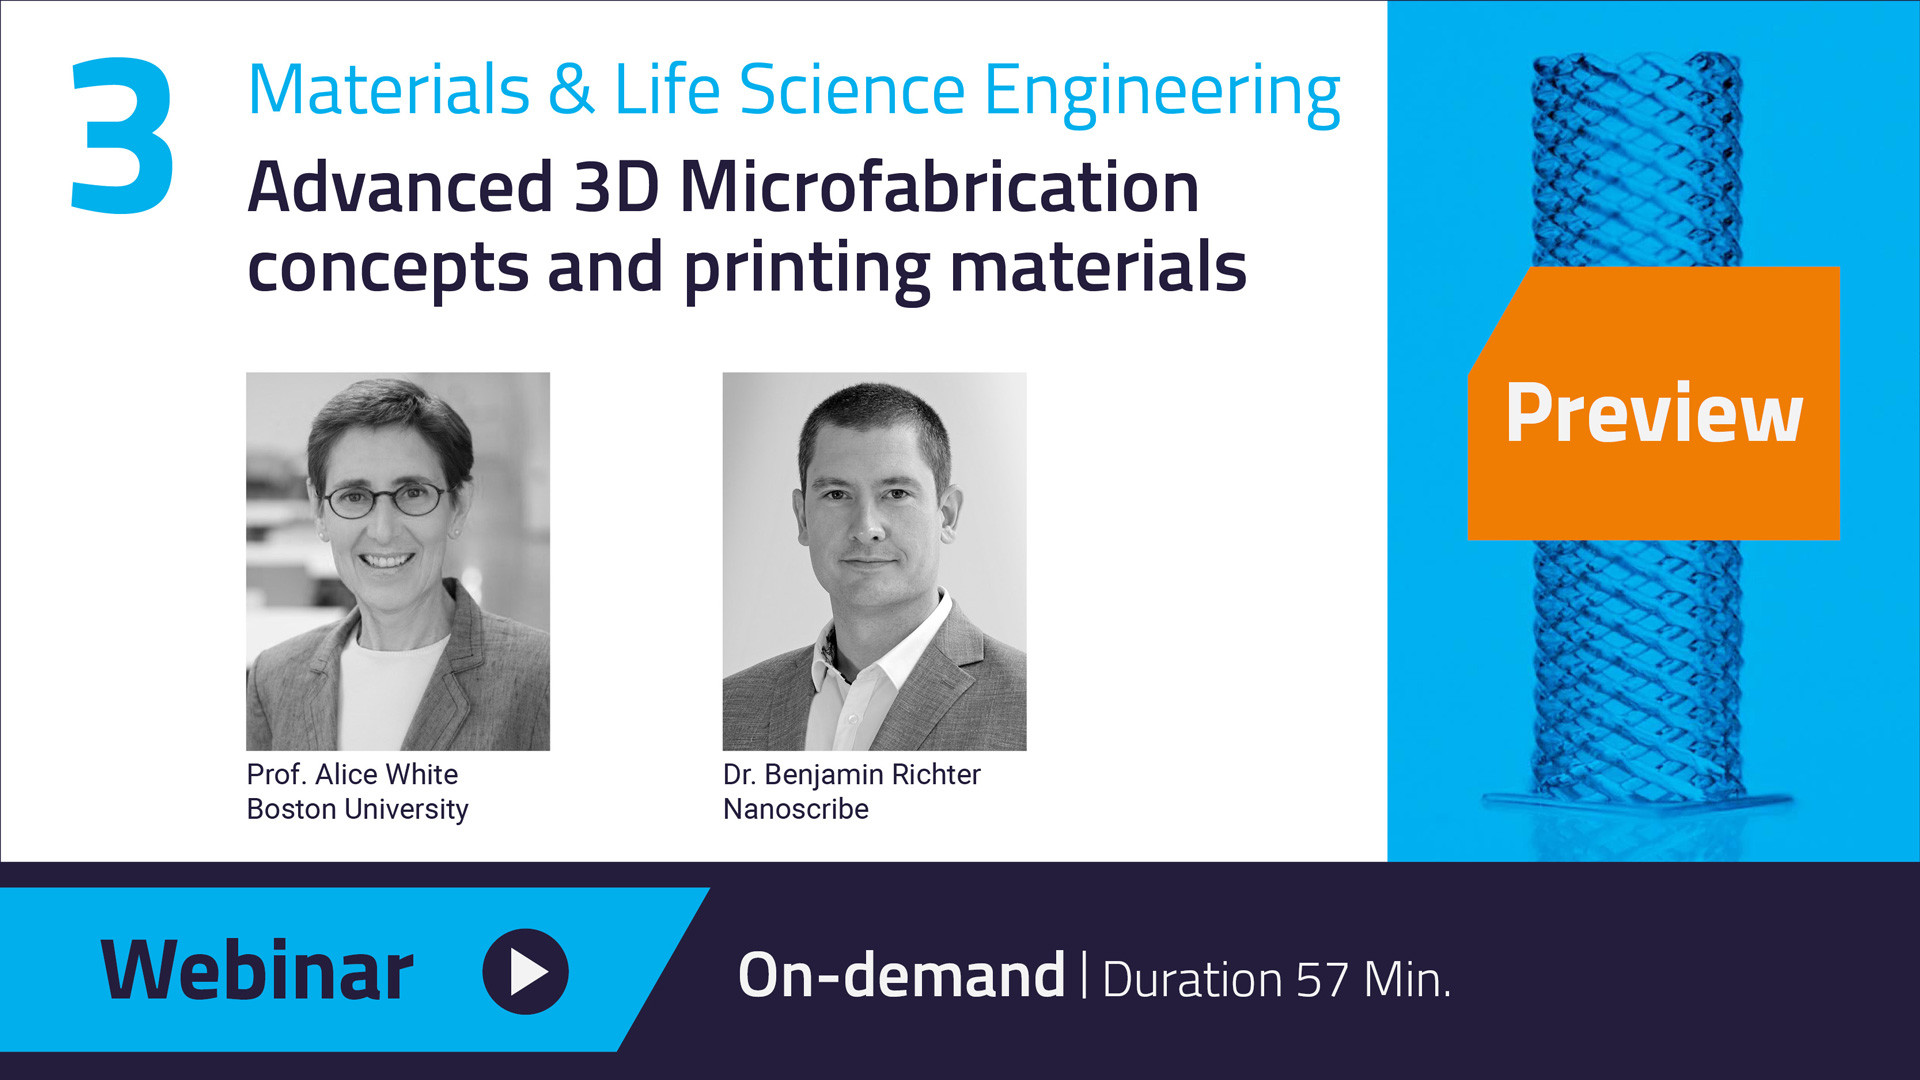 Our Webinar on Materials and Life Science Engineering is now available on-demand - watch the webinar here